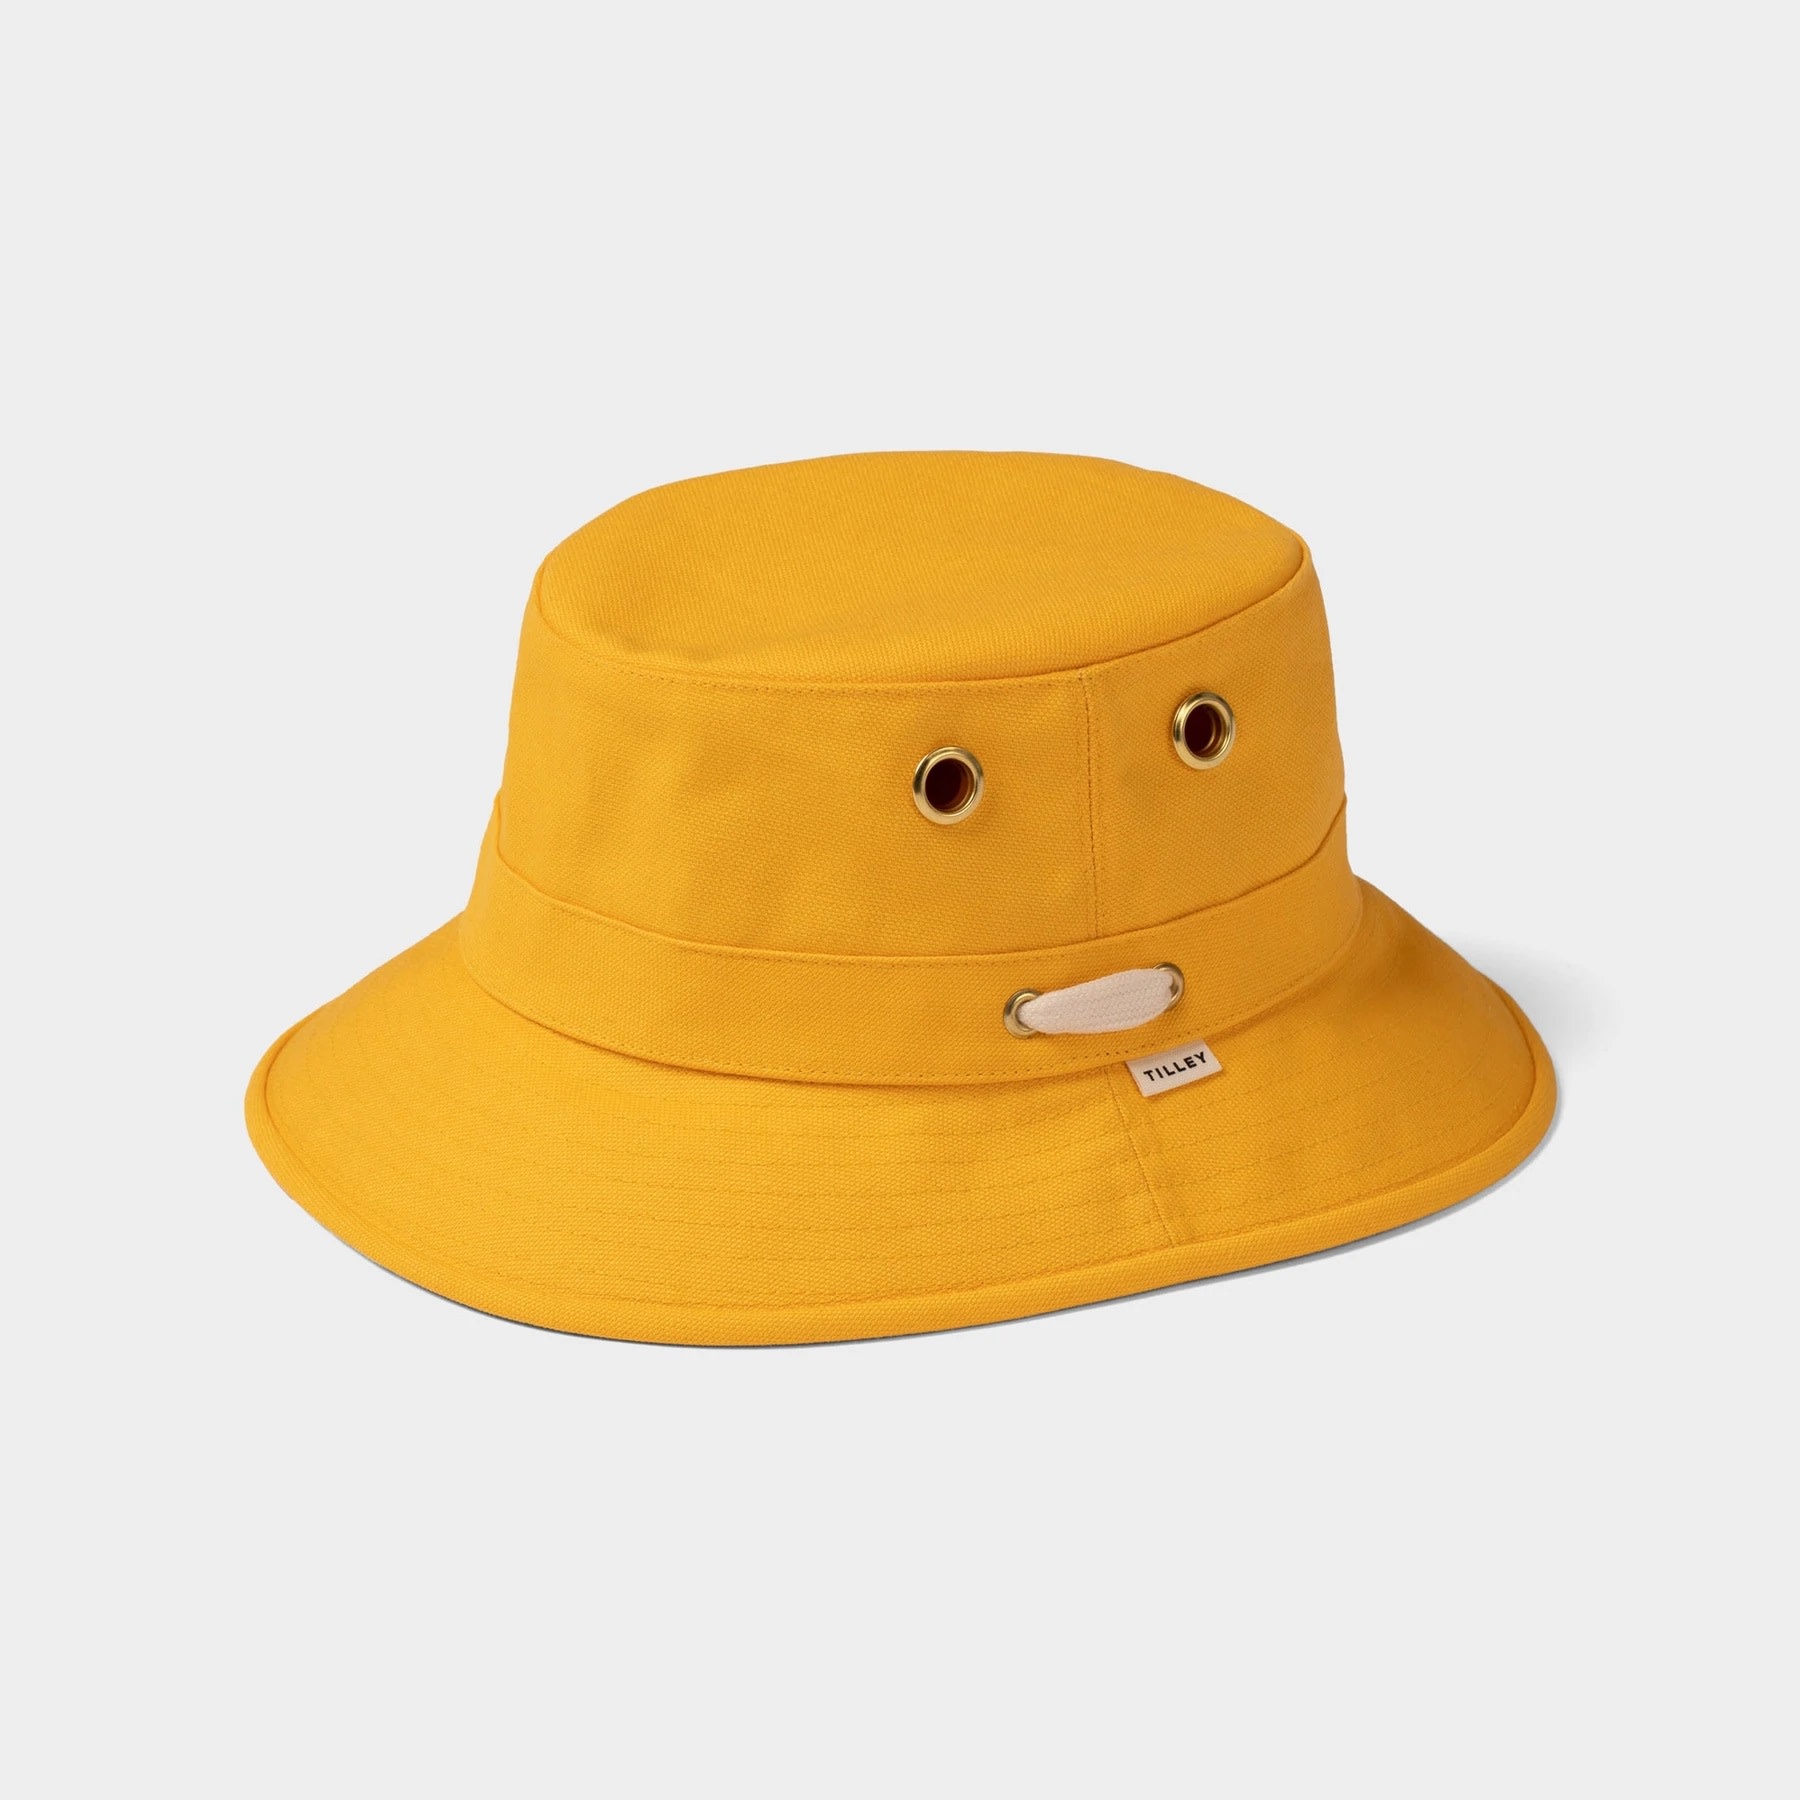 Tilley Tilley - The Iconic T1 Bucket Hat